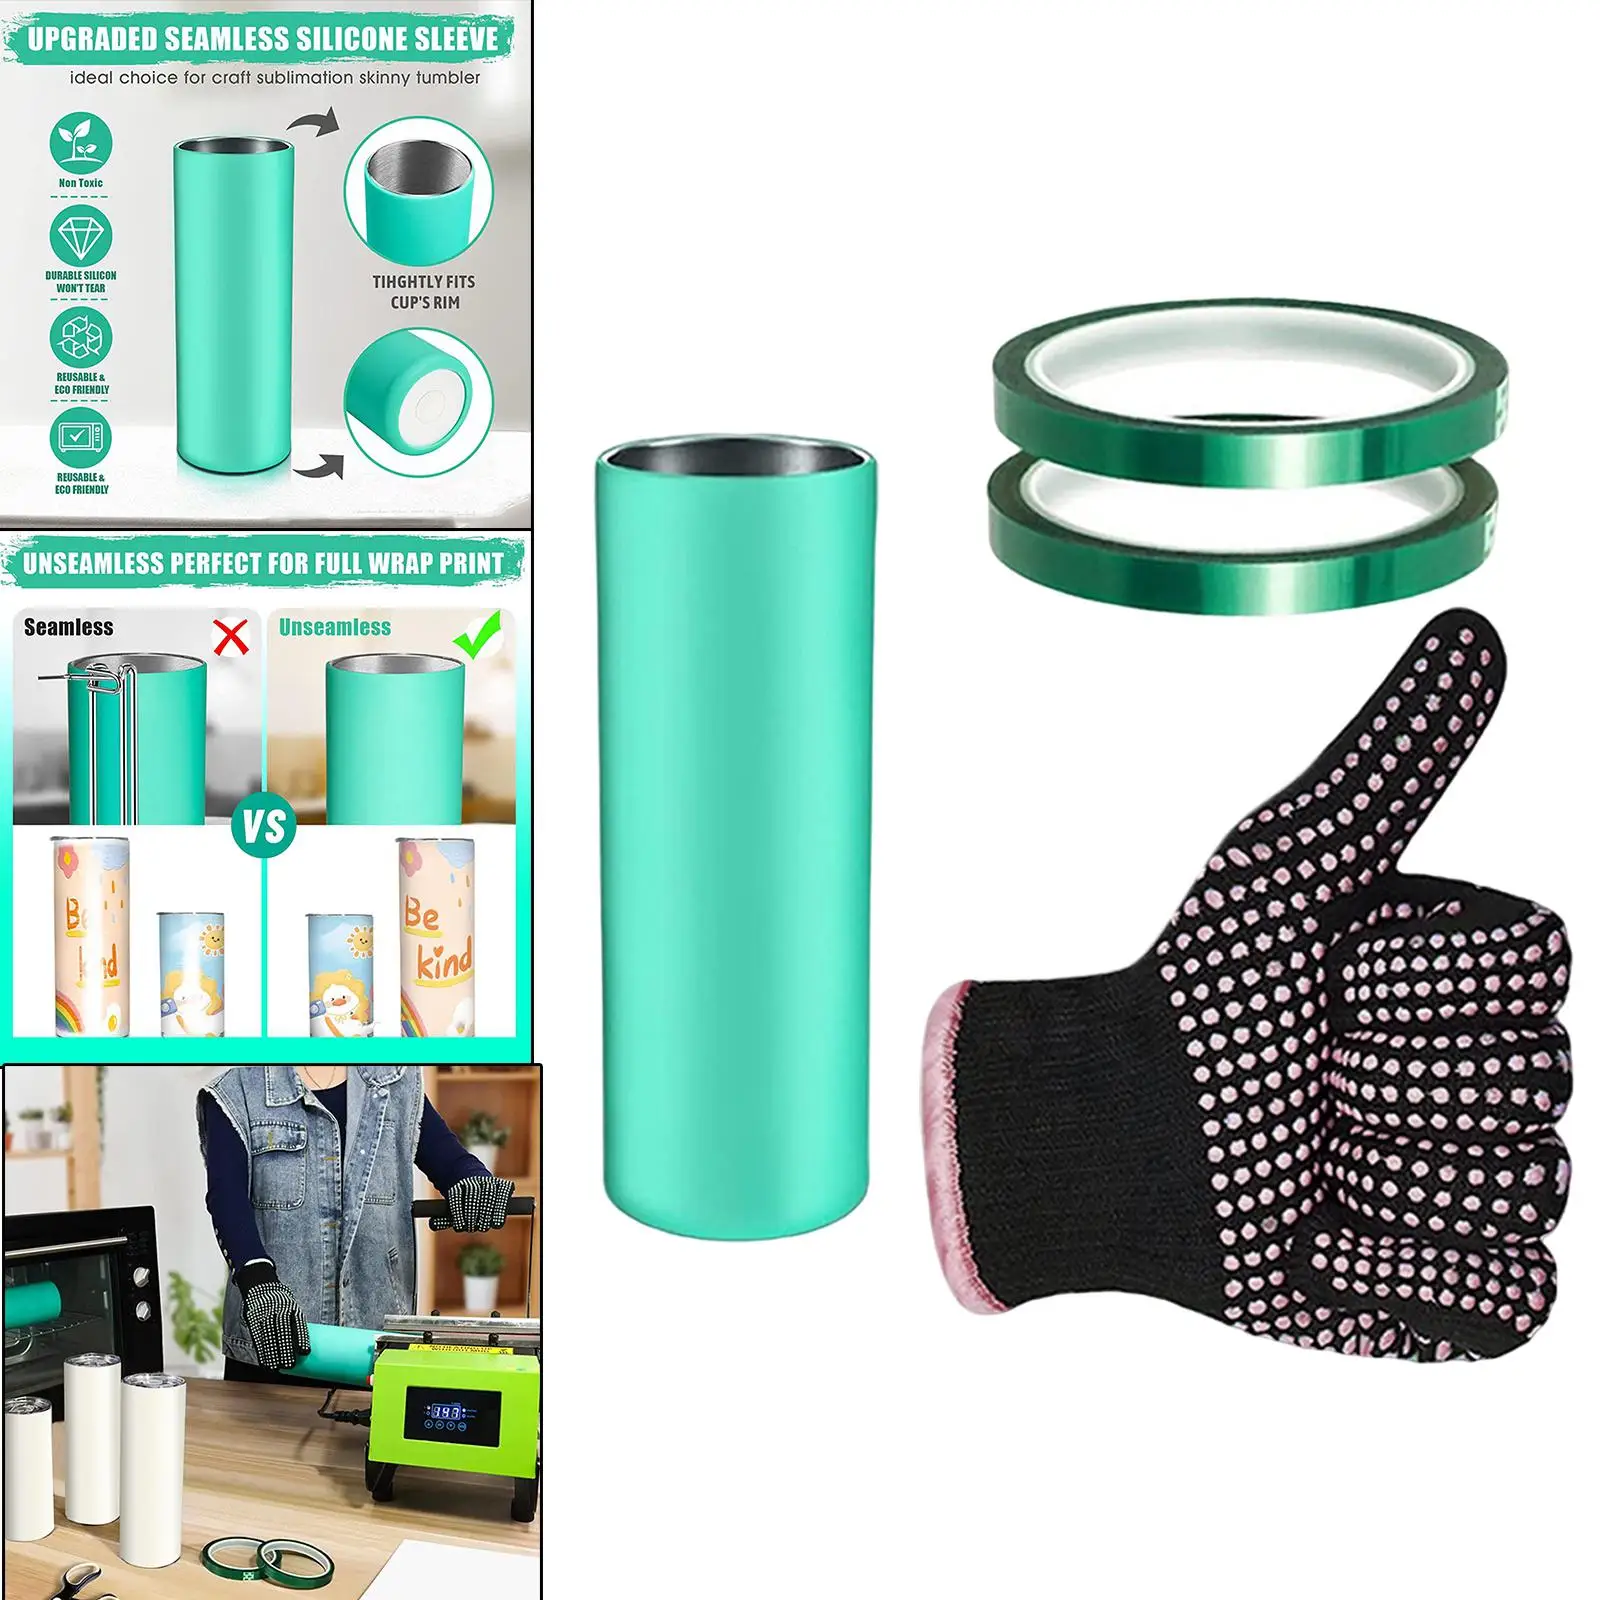 Silicone Bands Sleeve Kit W/ Heat Resistant Gloves, Transfer Tapes